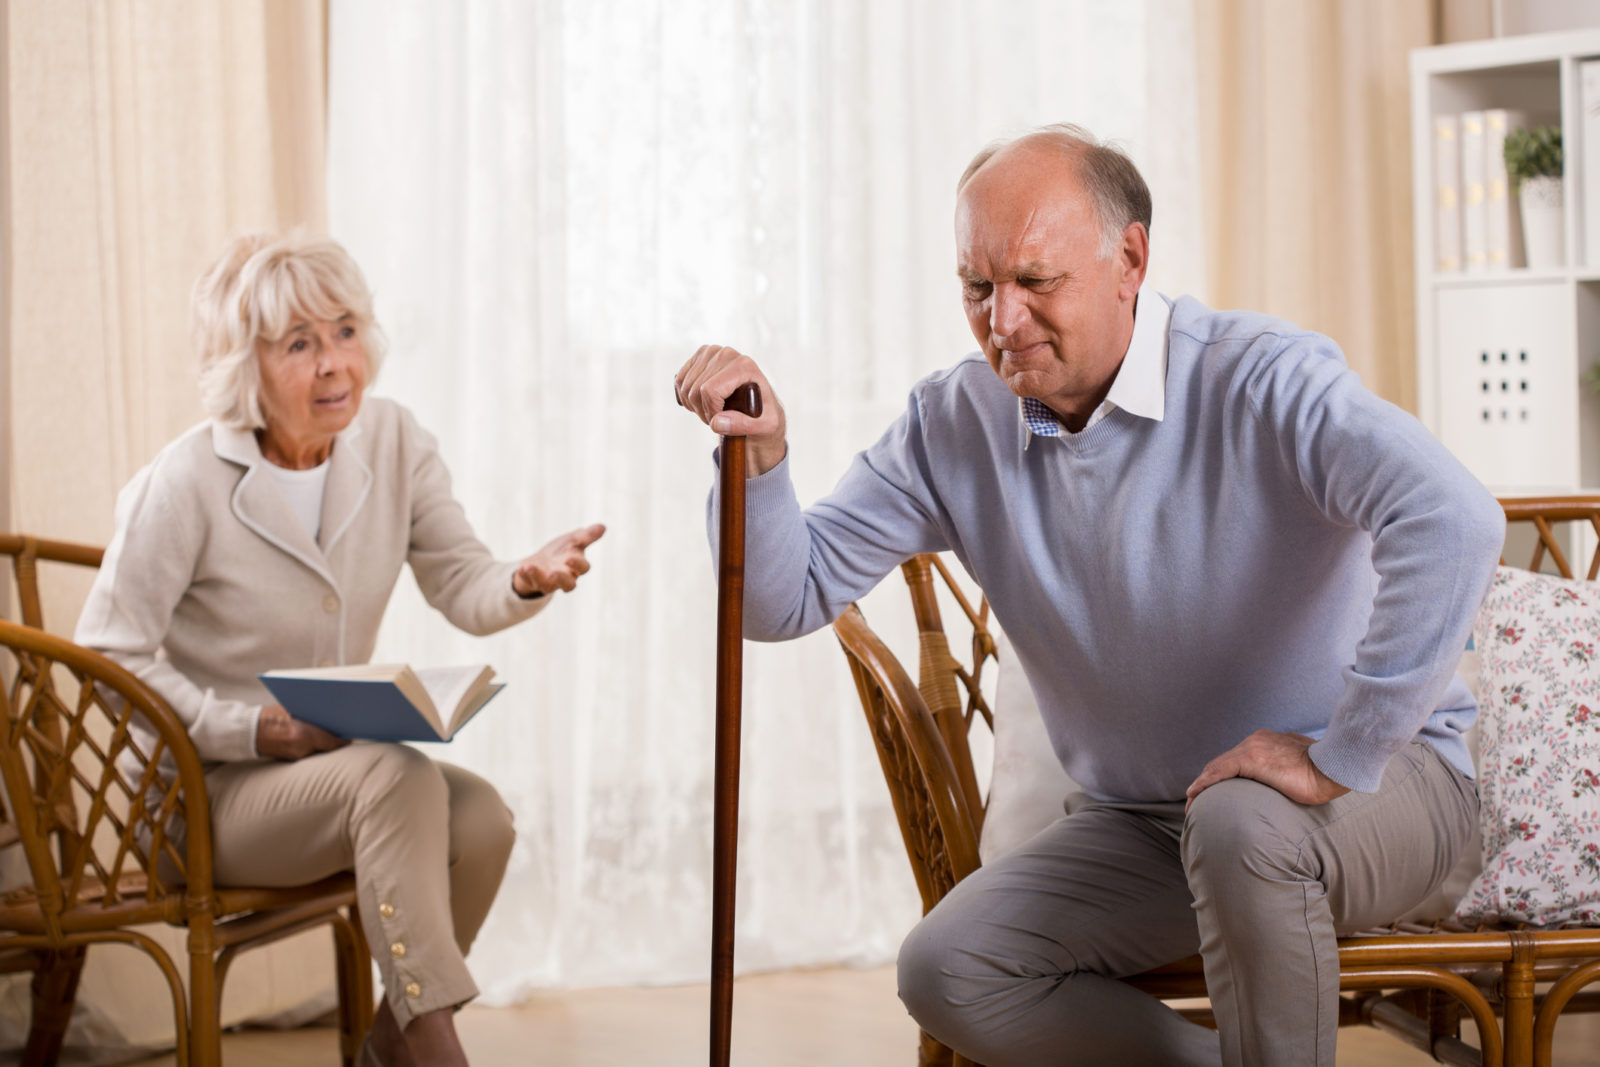 Senior man with knee arthritis trying to get up from chair and caring wife